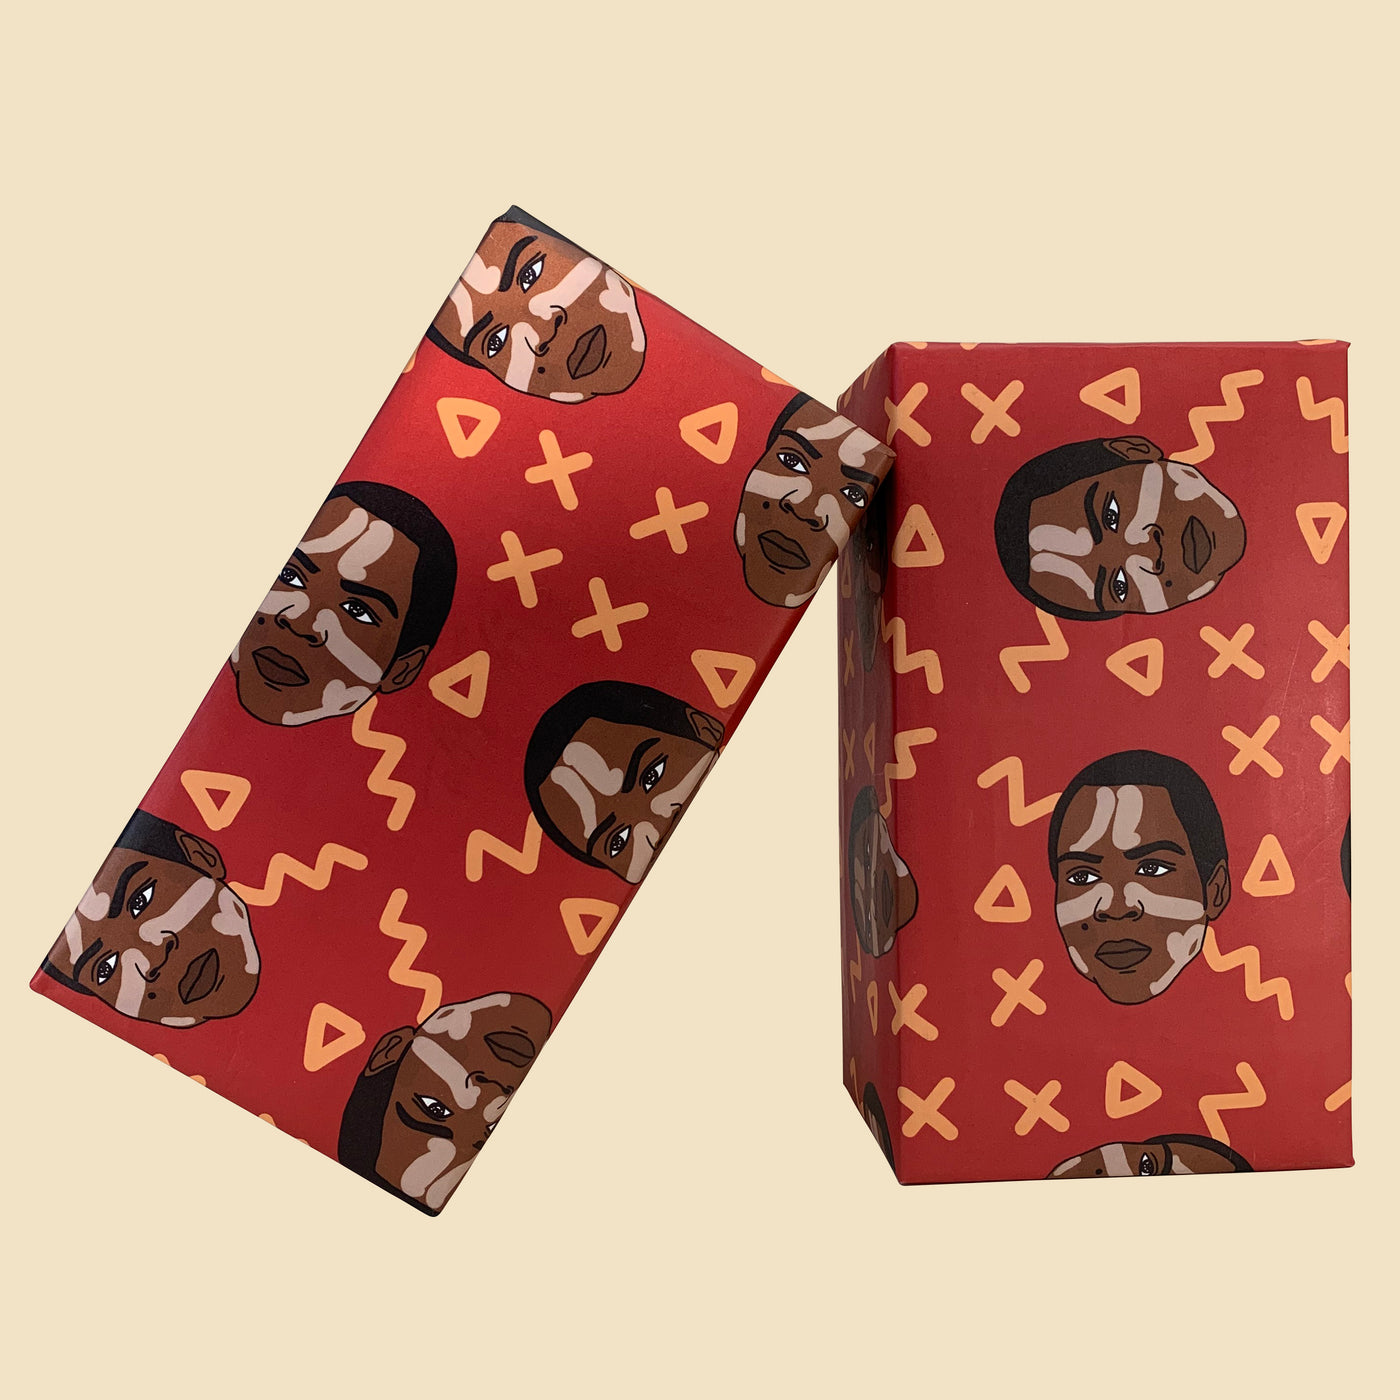 Burna Boy Wrapping Paper.